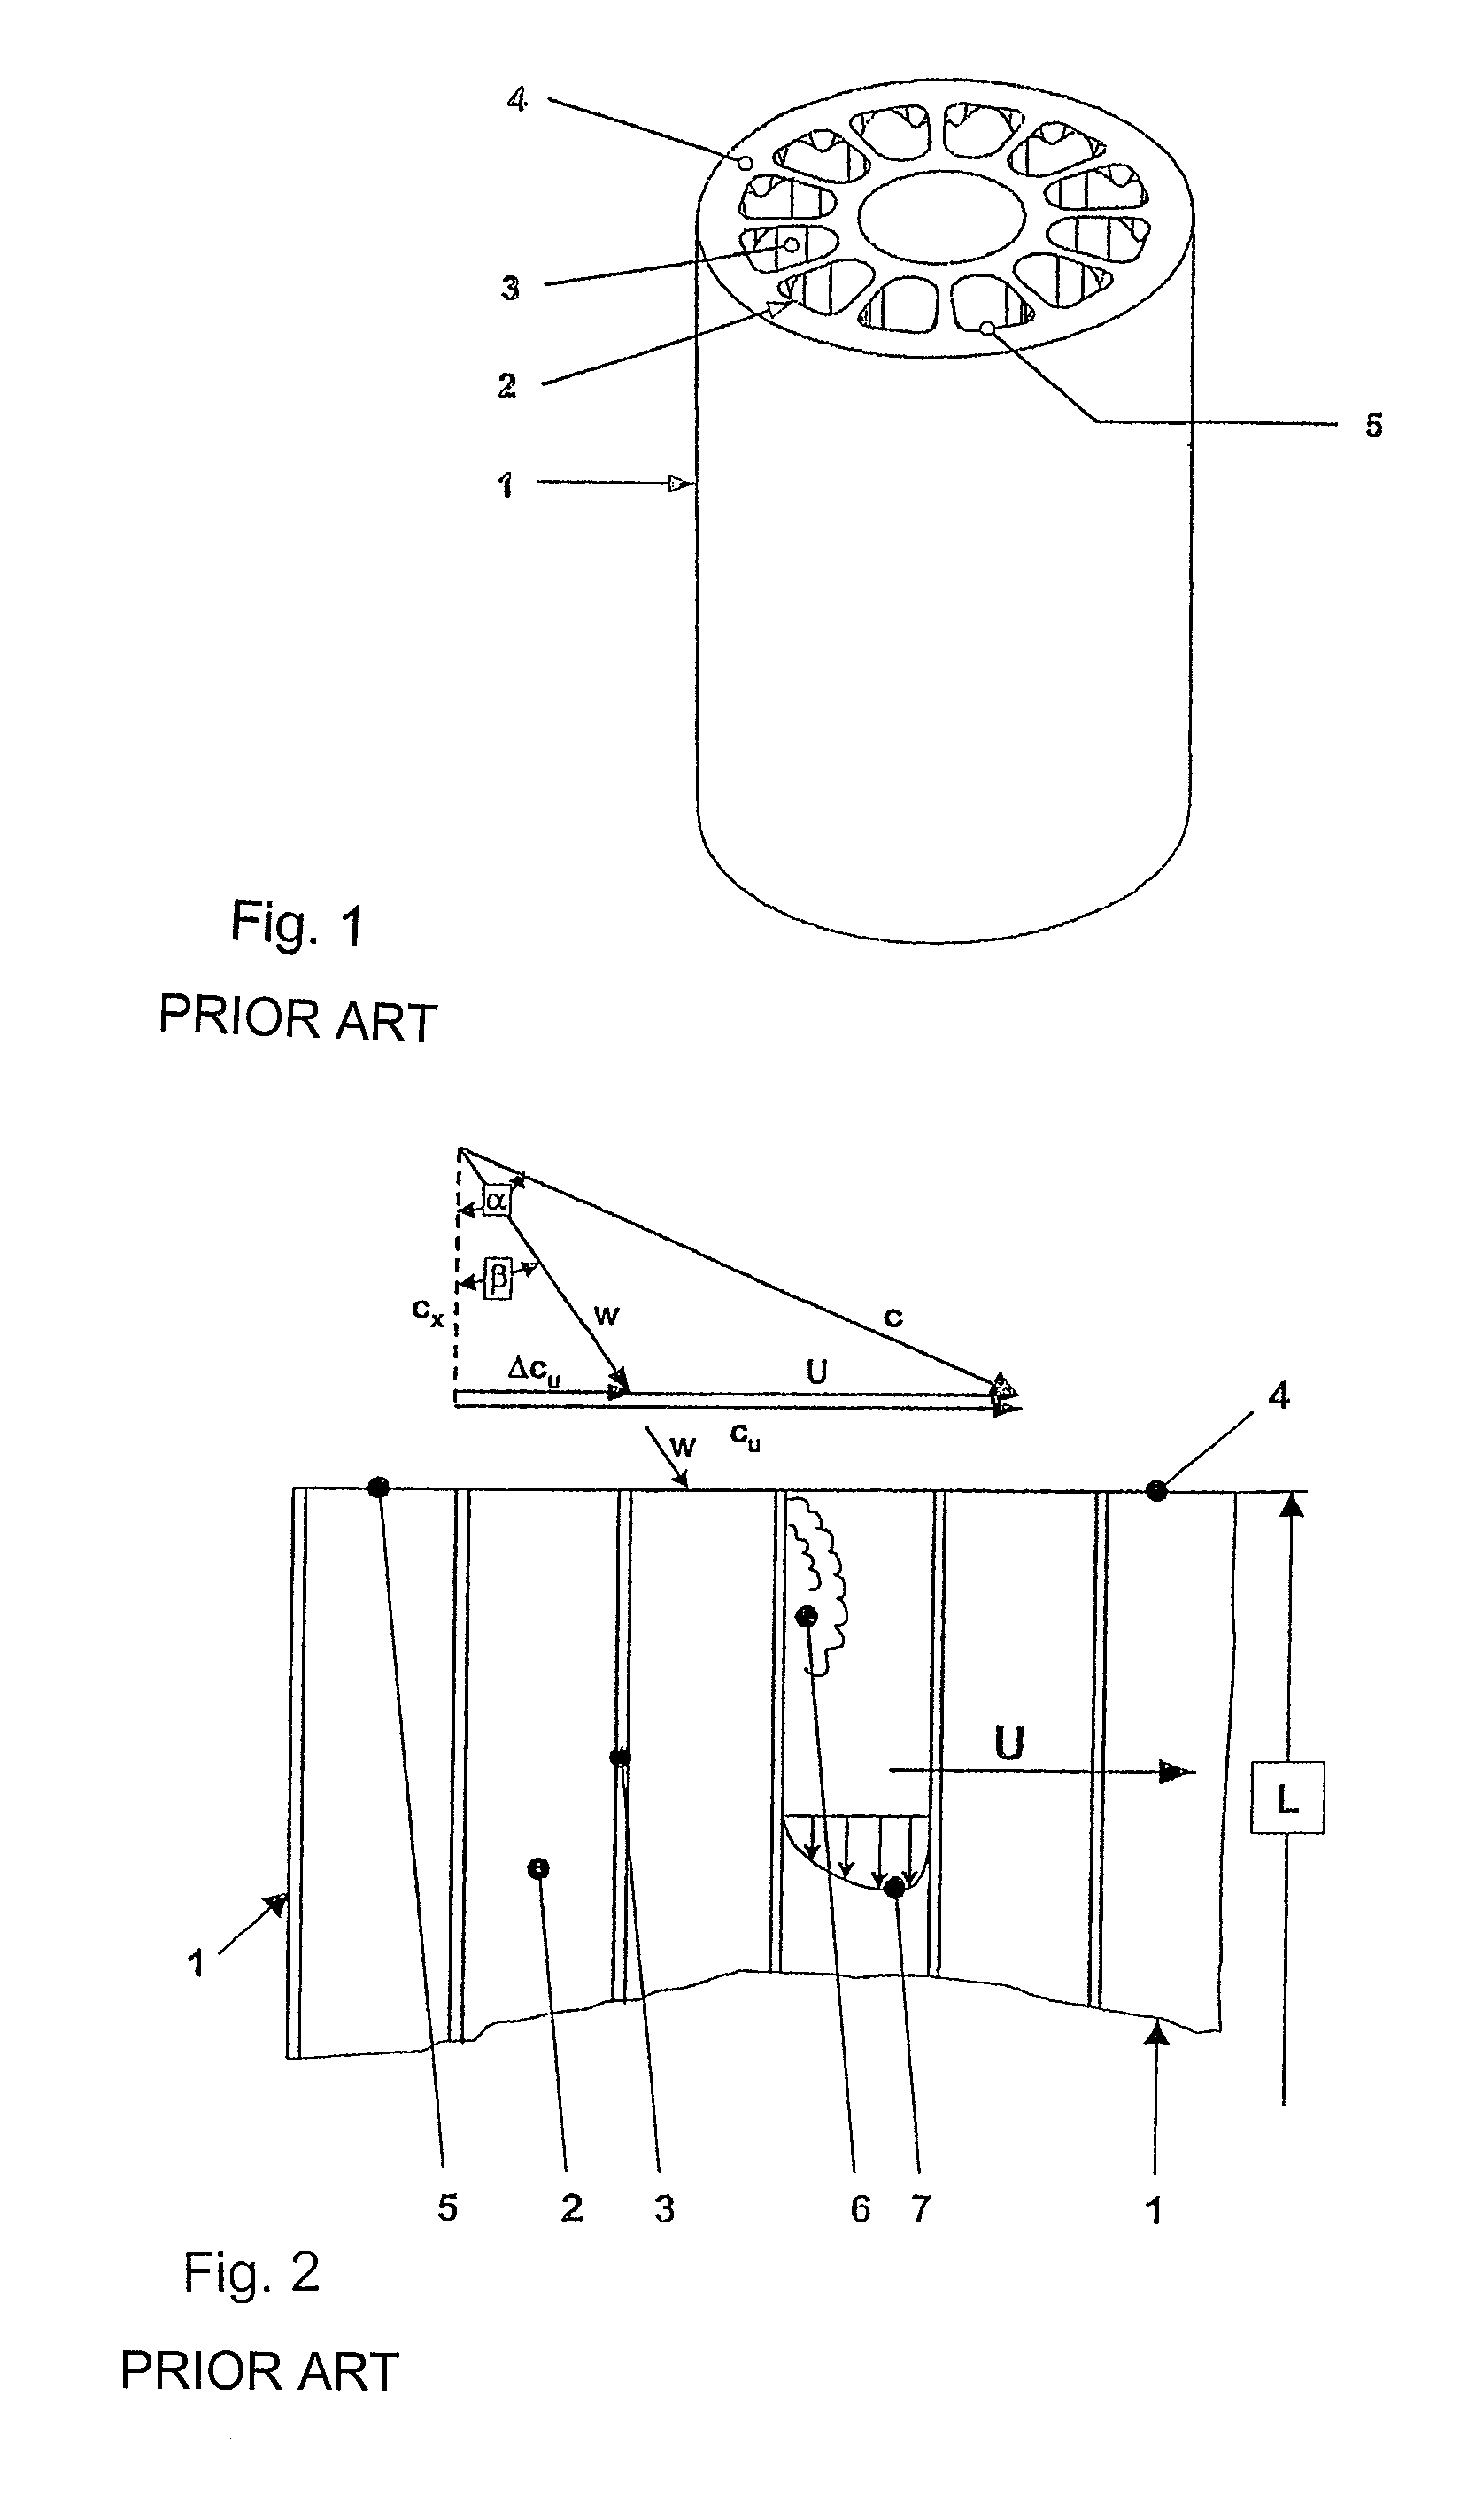 Channel form for a rotating pressure exchanger